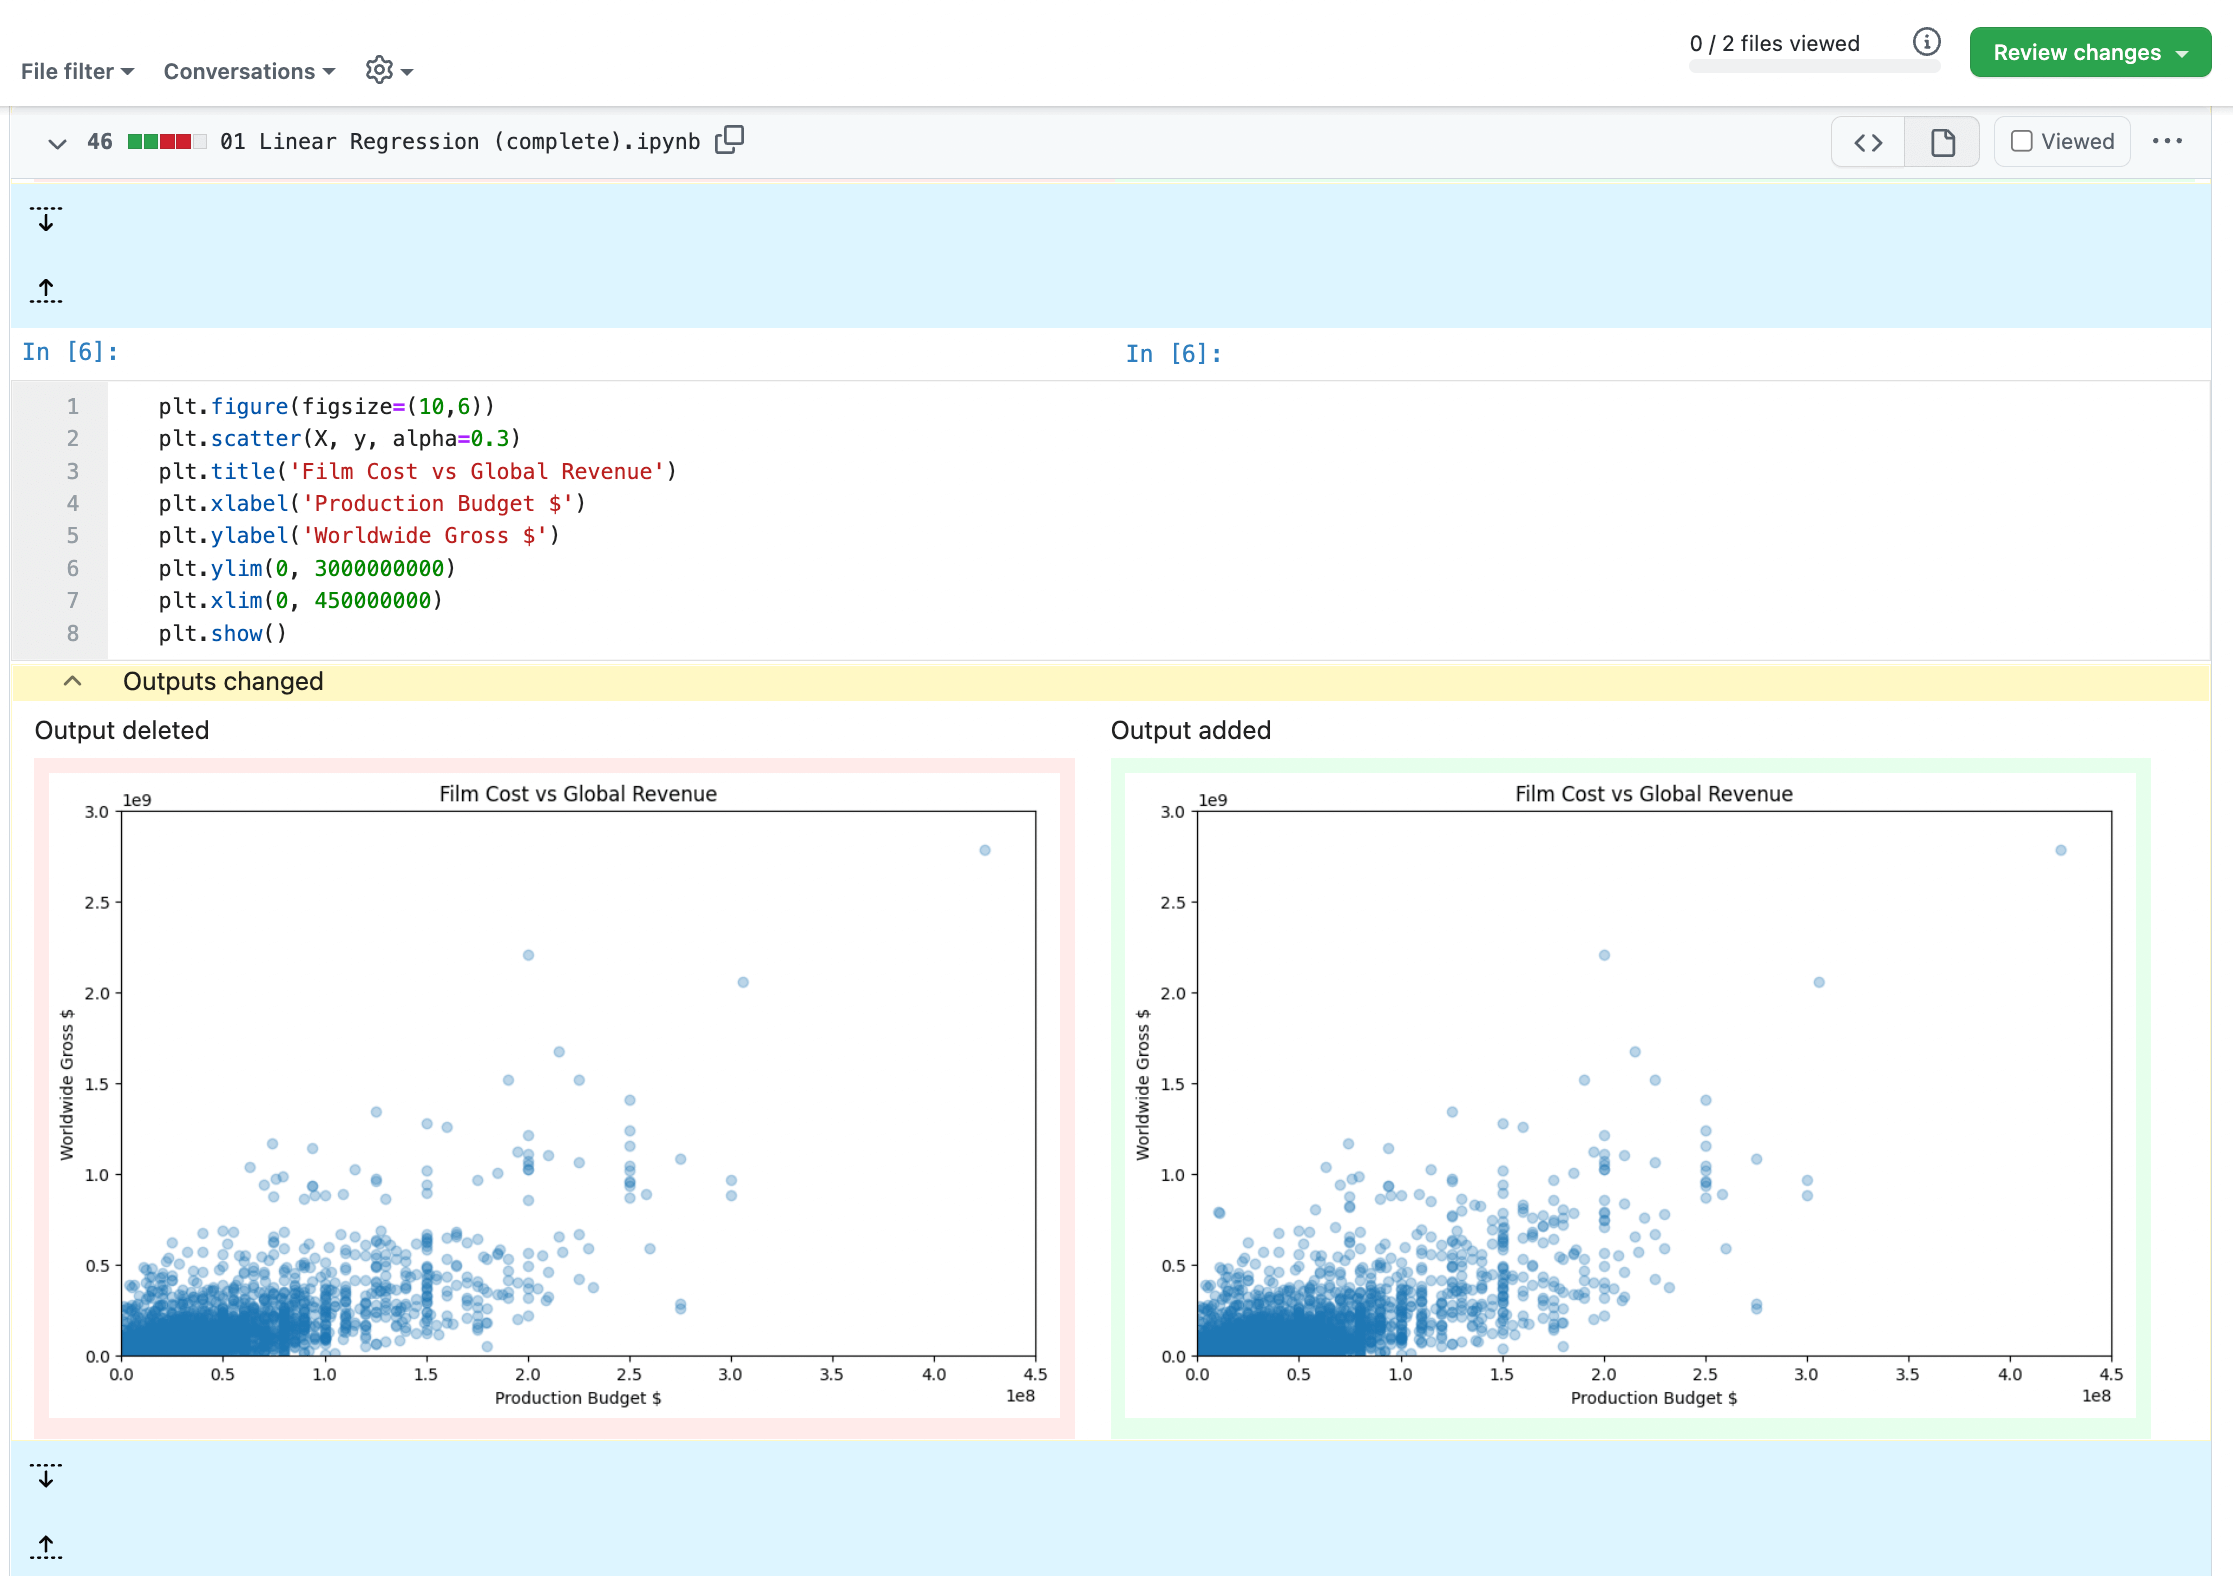 You cannot comment on rich diff in GitHub